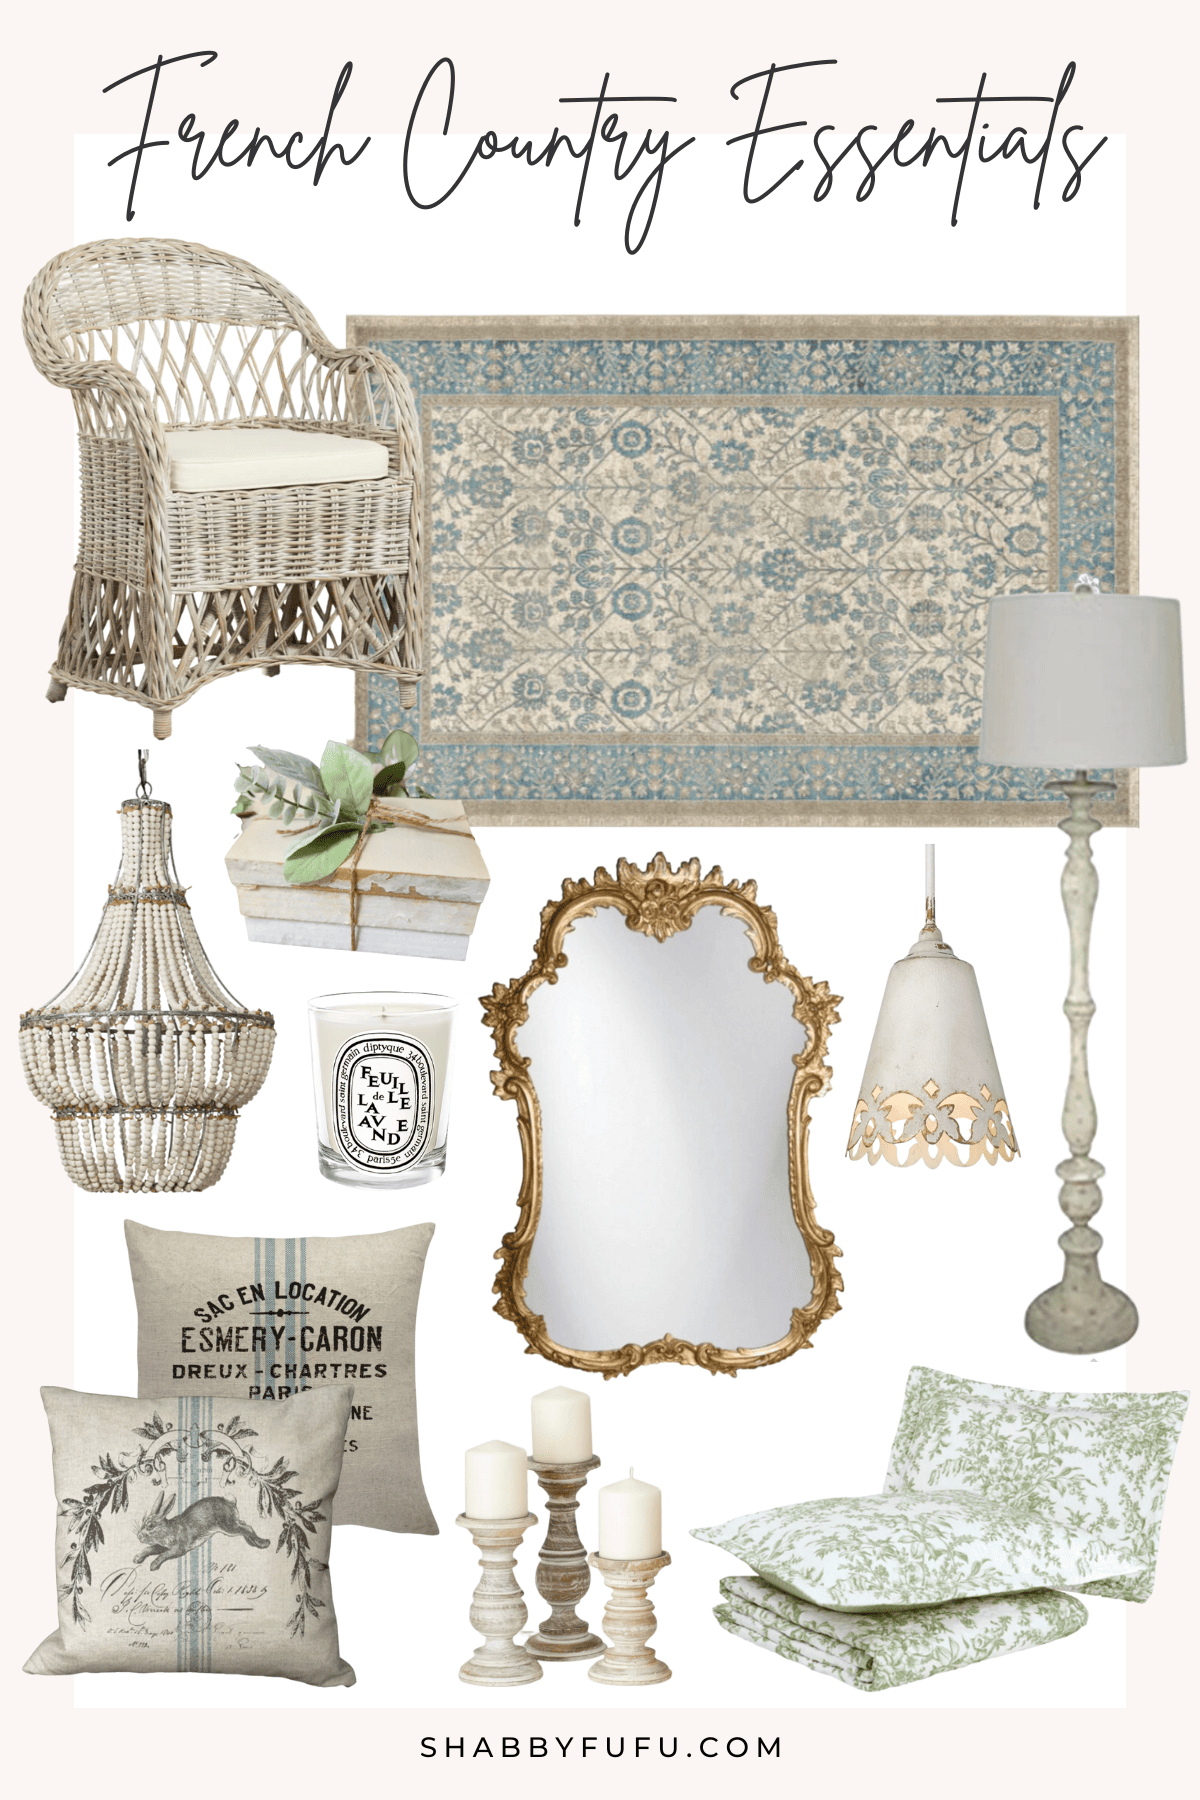 collage style image with french country furniture pieces